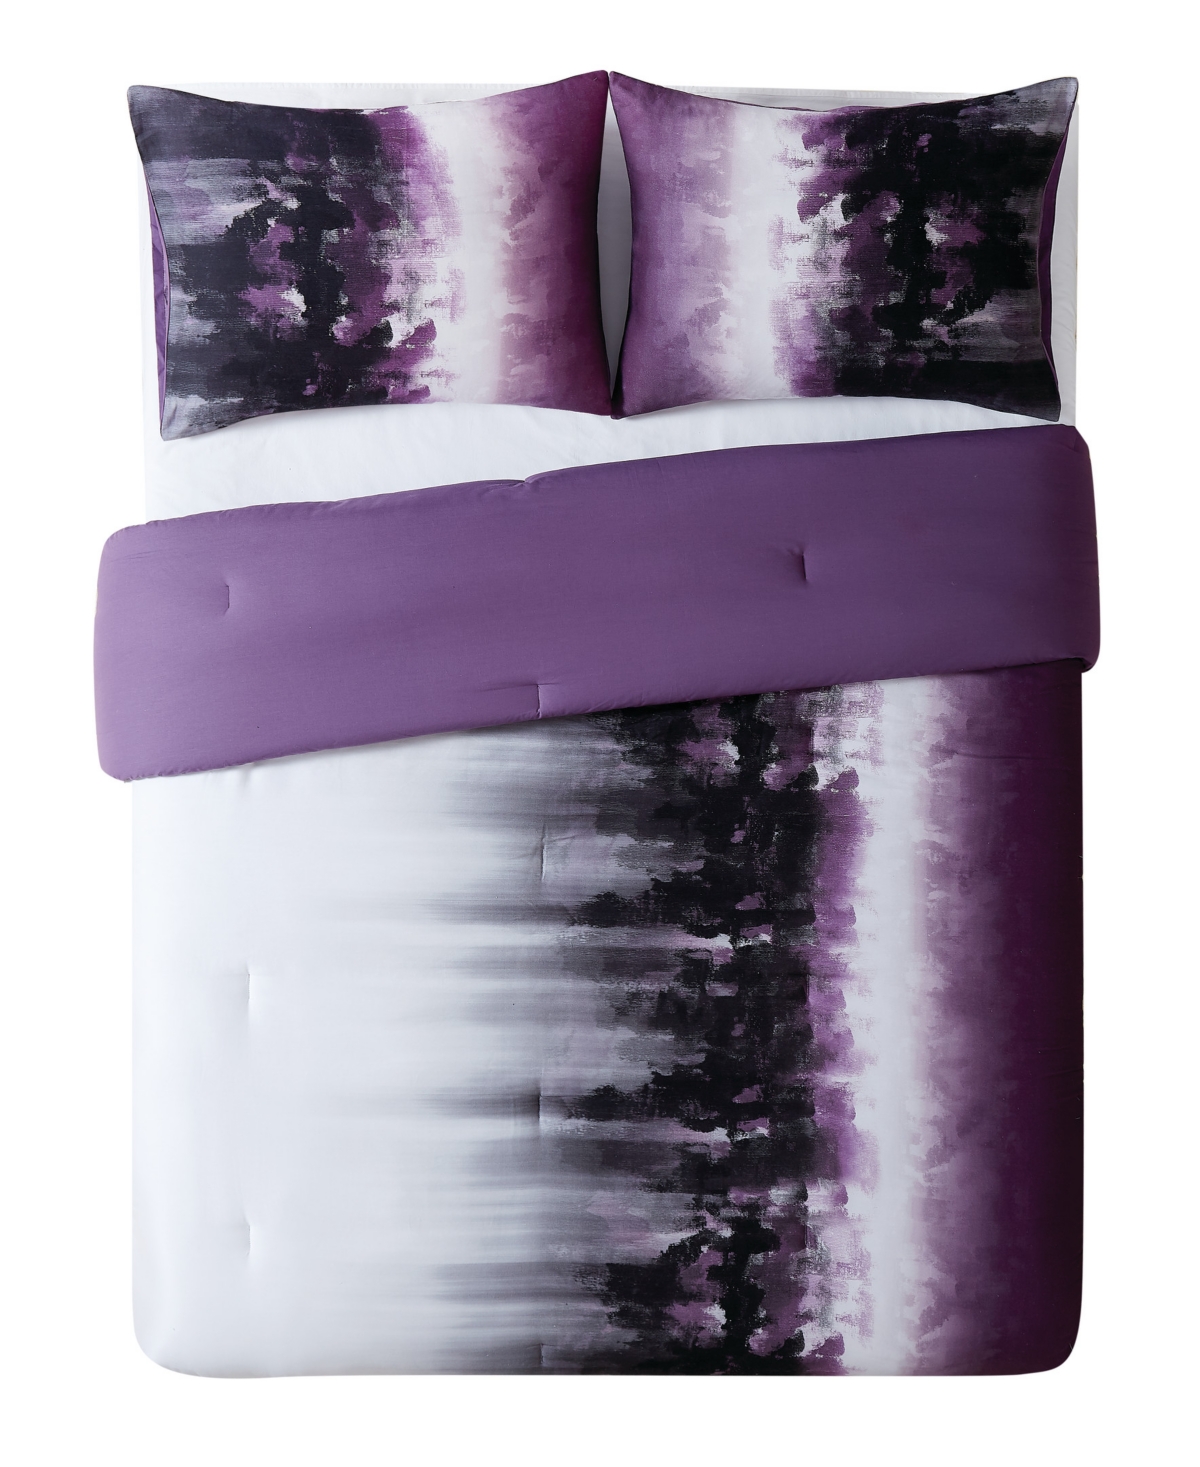 Shop Vince Camuto Home Vince Camuto Mirrea Twin Extra Long Comforter Set In White,purple